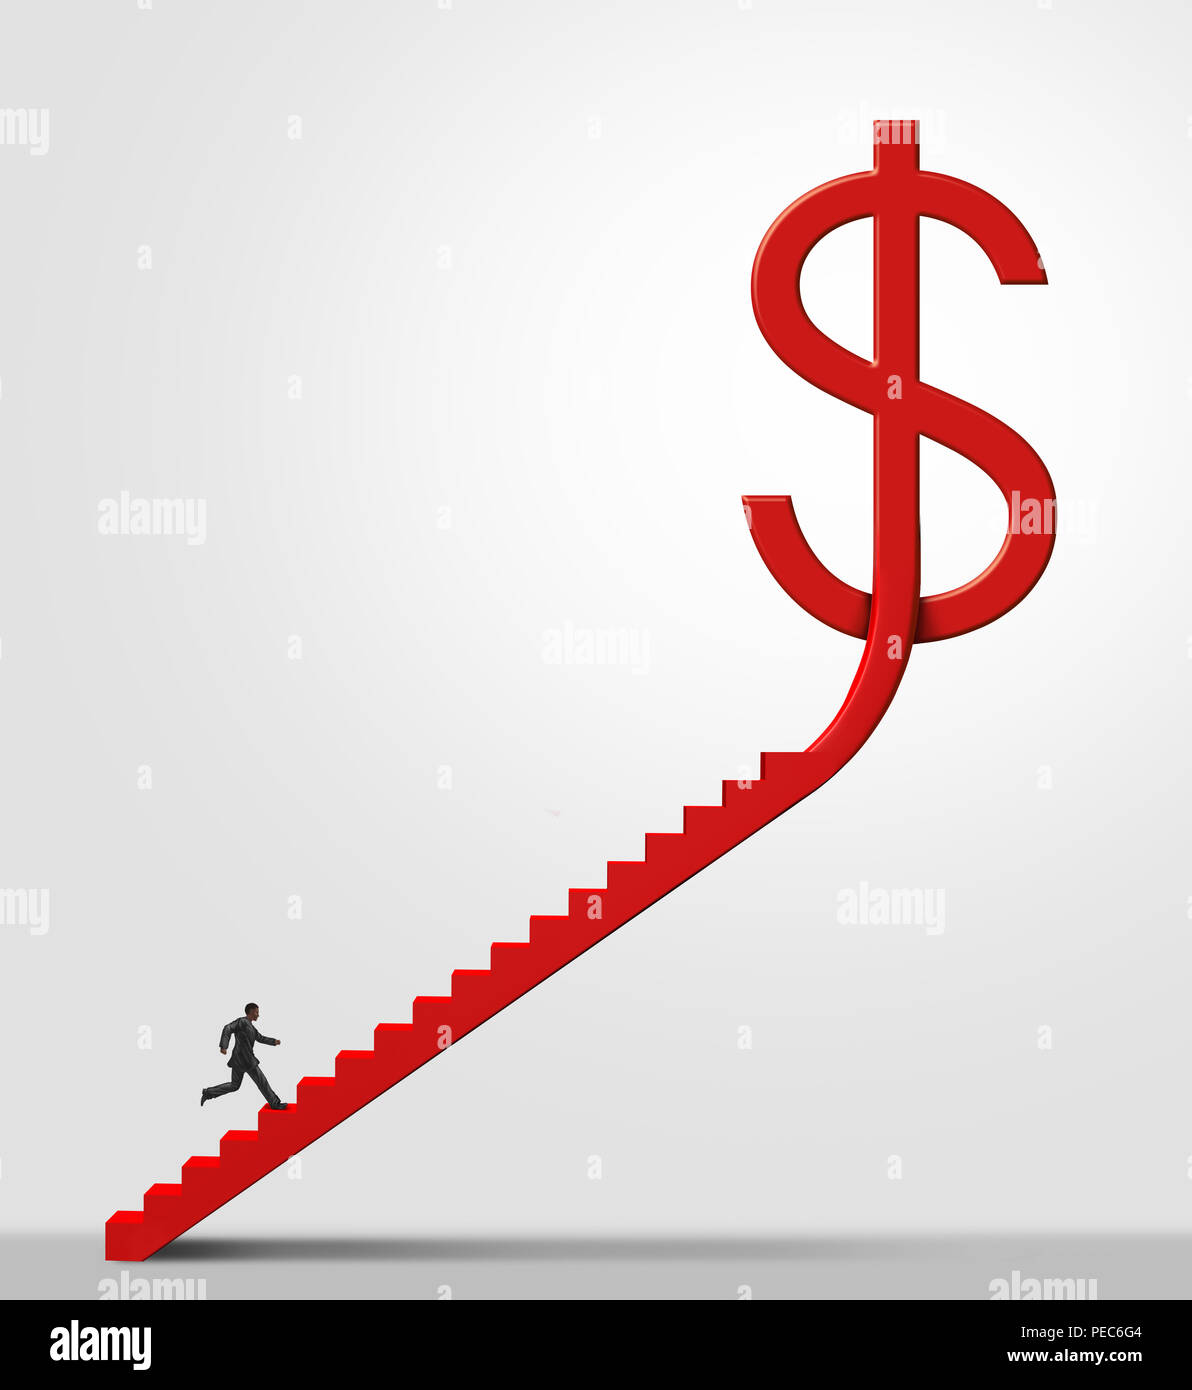 Money opportunity and a financial advisor or investor reaching wealth goals as a businessman climbing stairs towards a dollar sign. Stock Photo